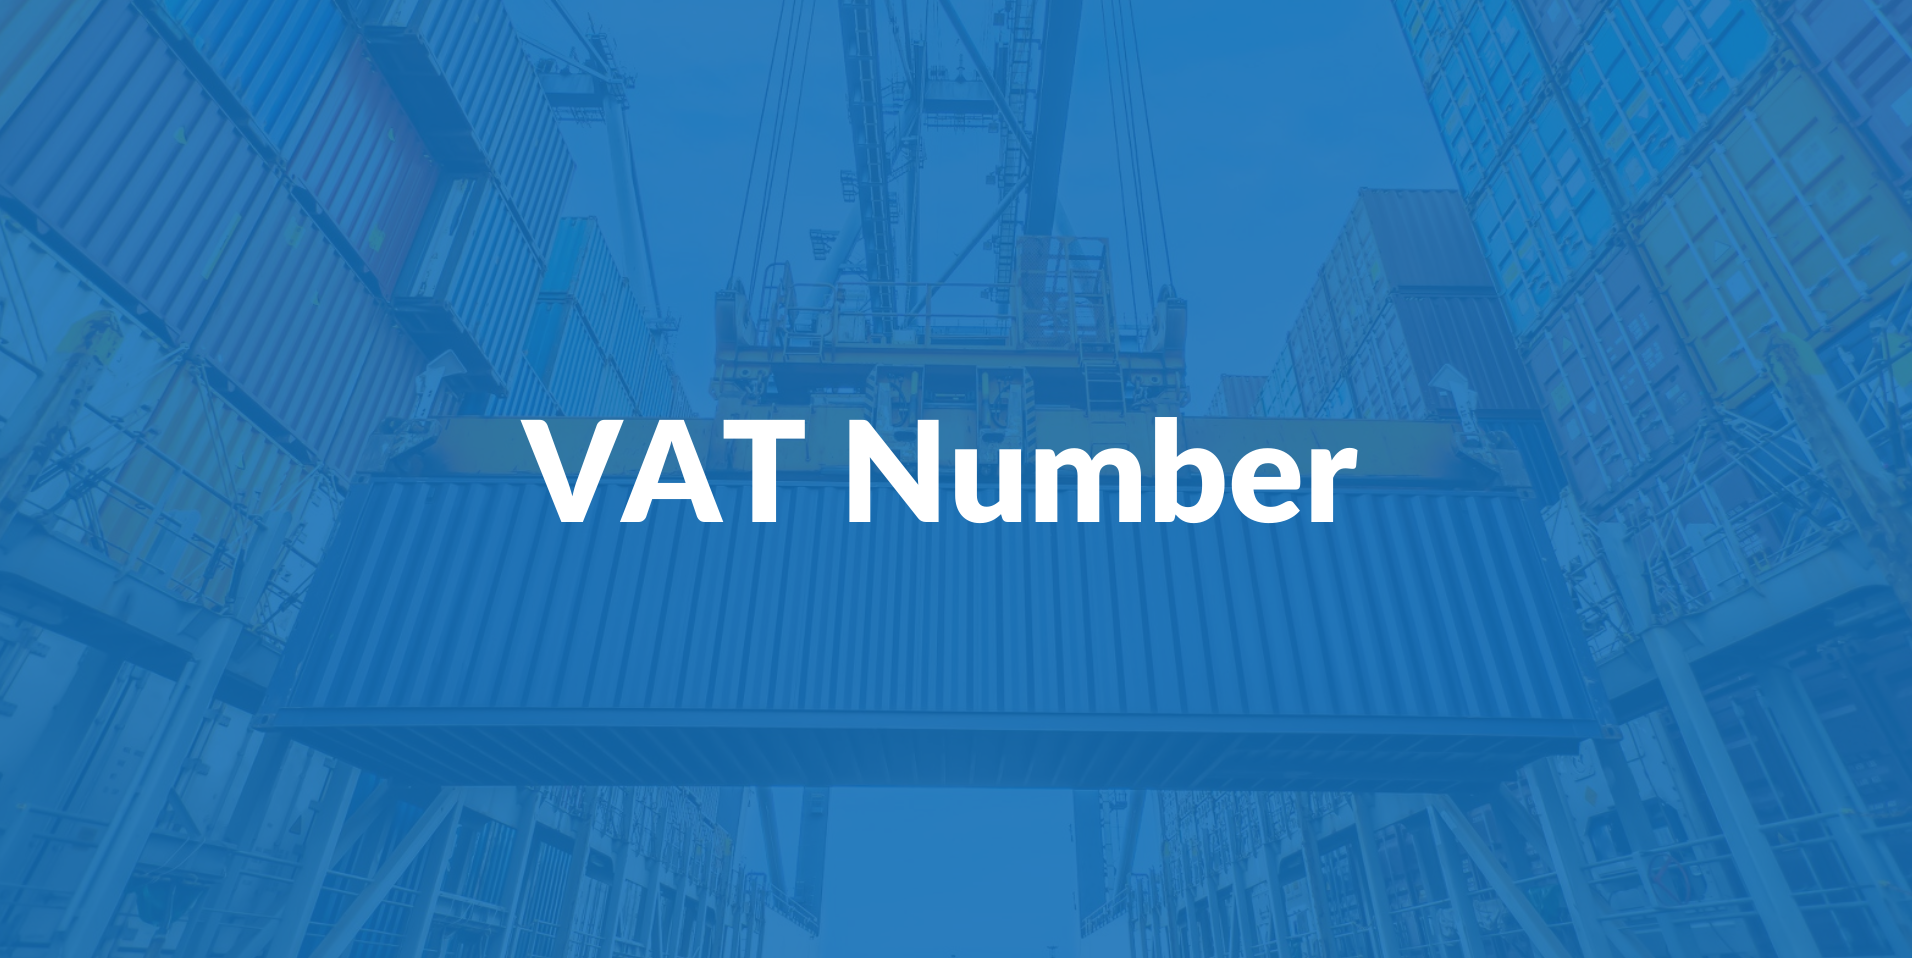 What is the VAT Number?